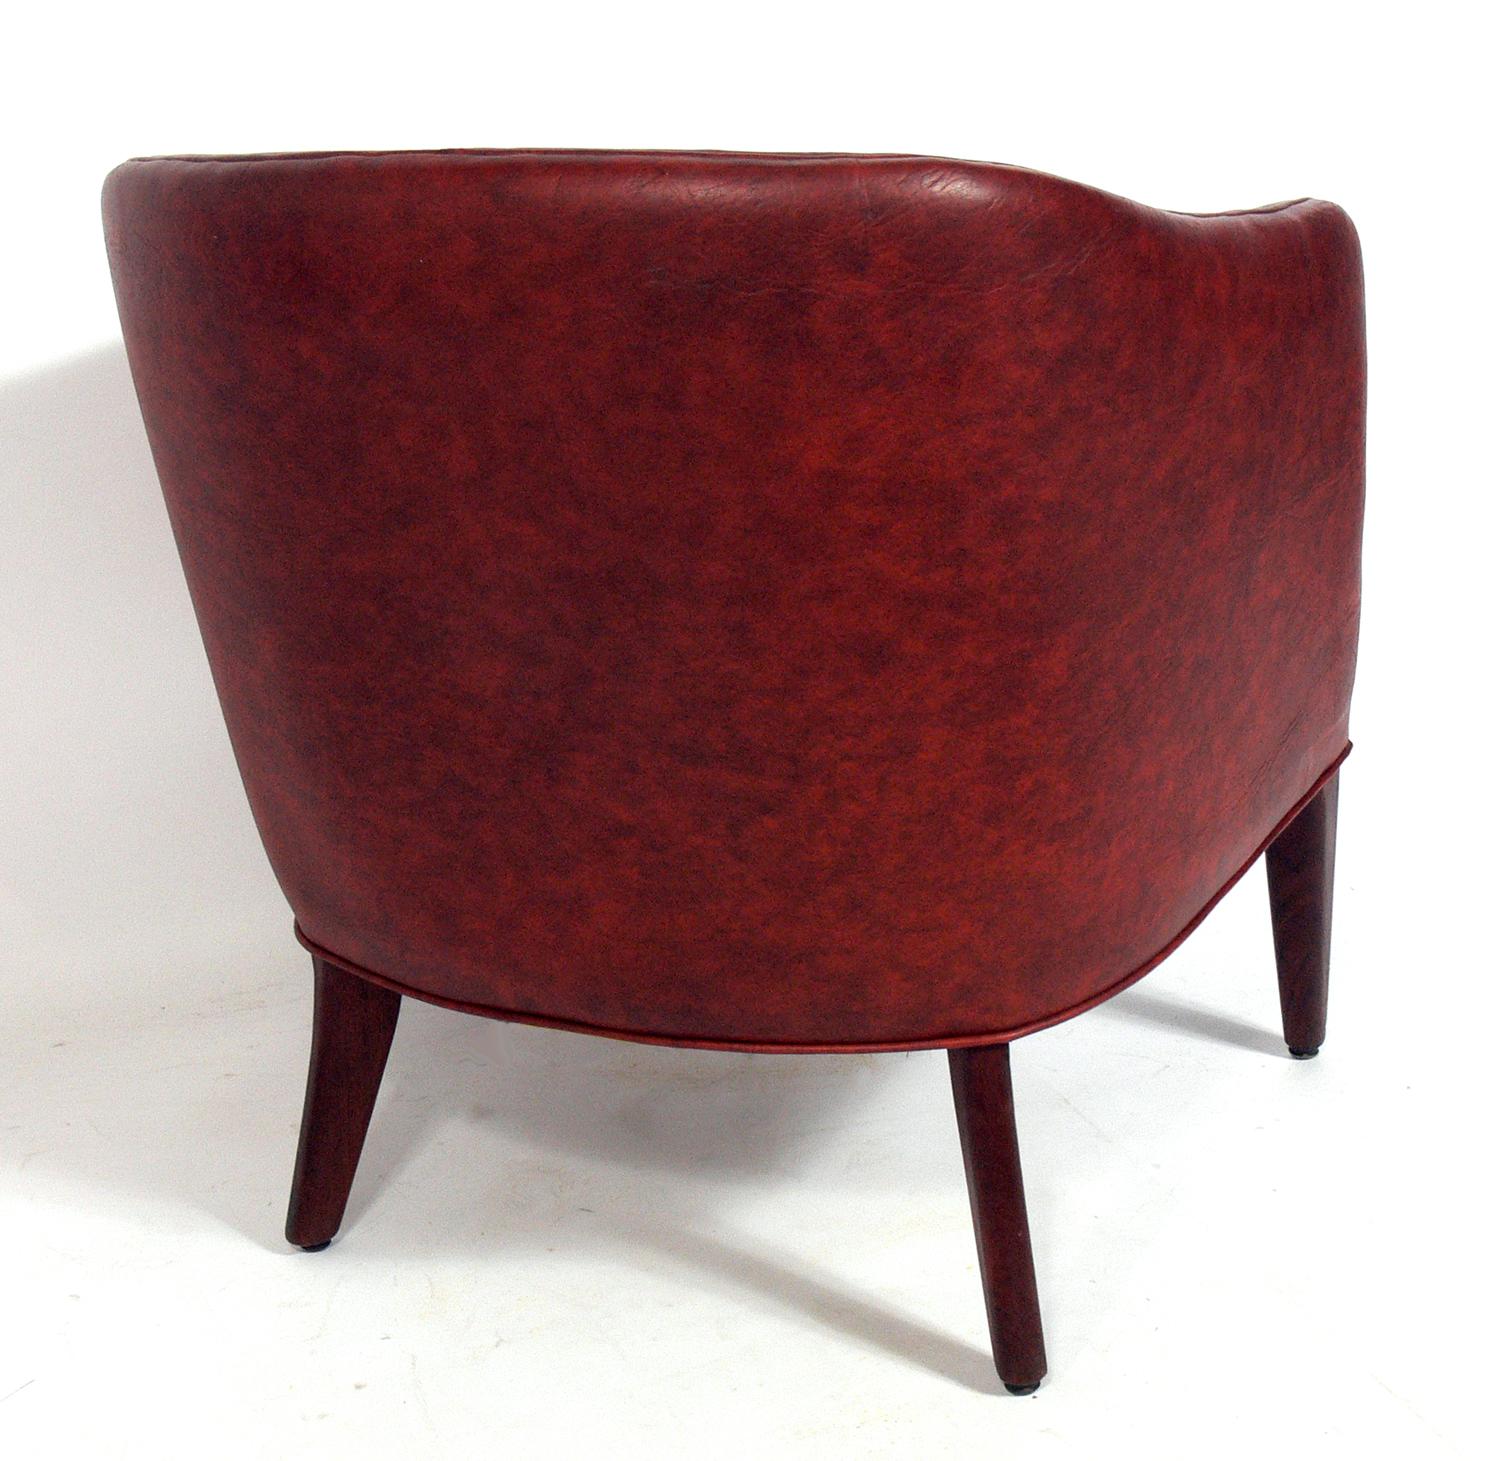 Mid-20th Century Curvaceous Danish Modern Chair